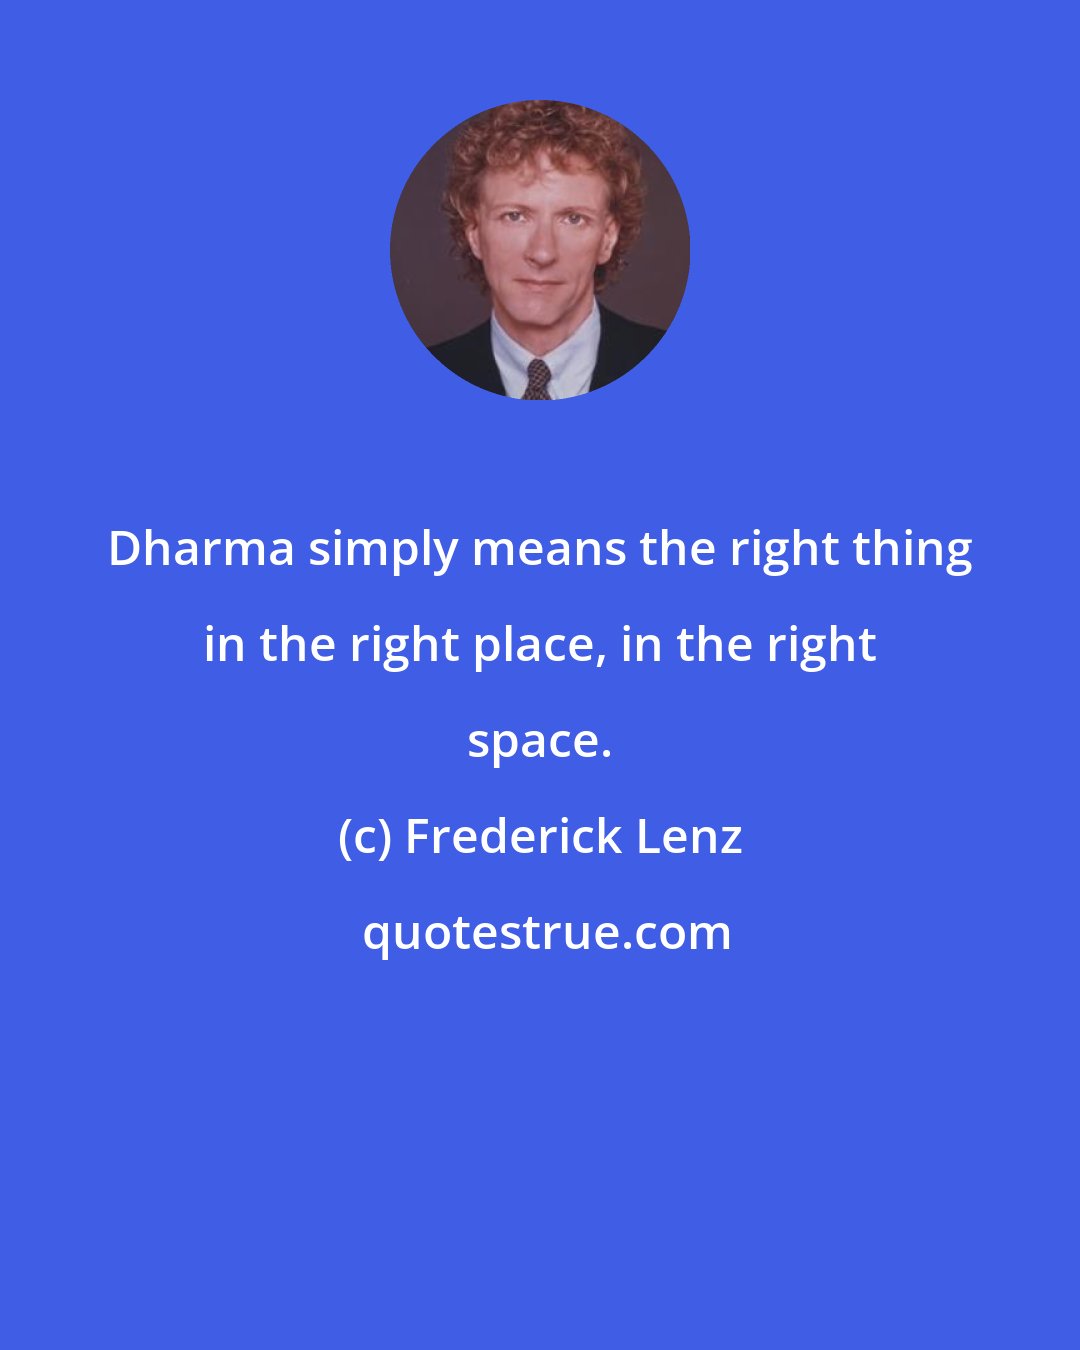 Frederick Lenz: Dharma simply means the right thing in the right place, in the right space.